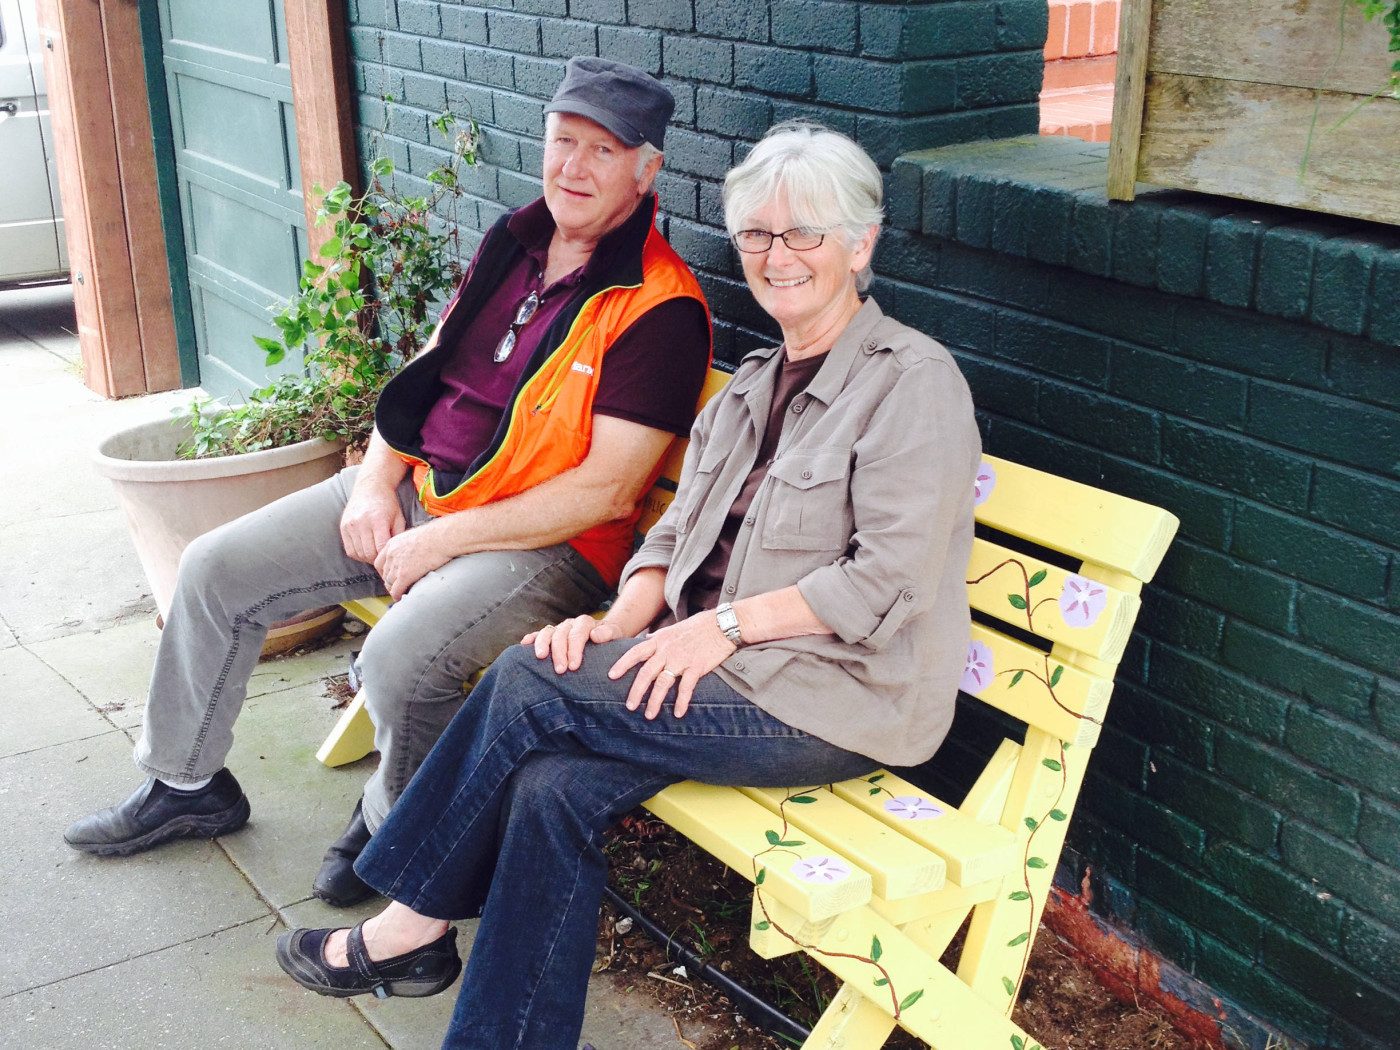 This Guy Reclaimed Community By Putting Out Guerrilla Benches